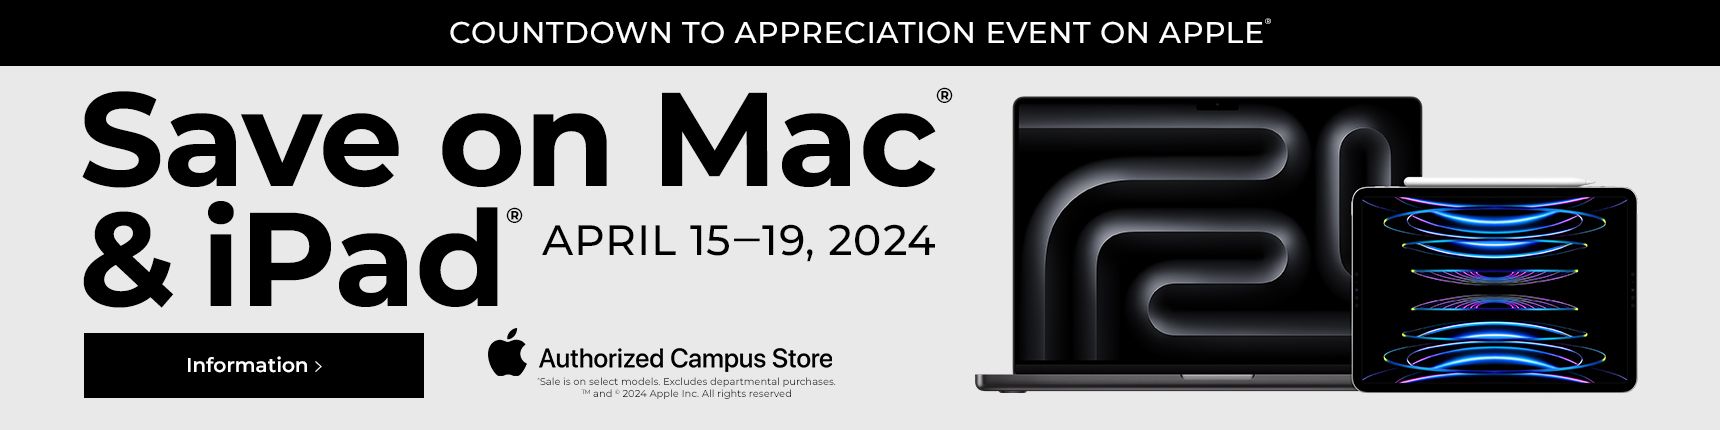 Instore. Countdown to appreciation event on Apple. Save on Mac & iPad. April 15-19,2024. Authorized campus store.